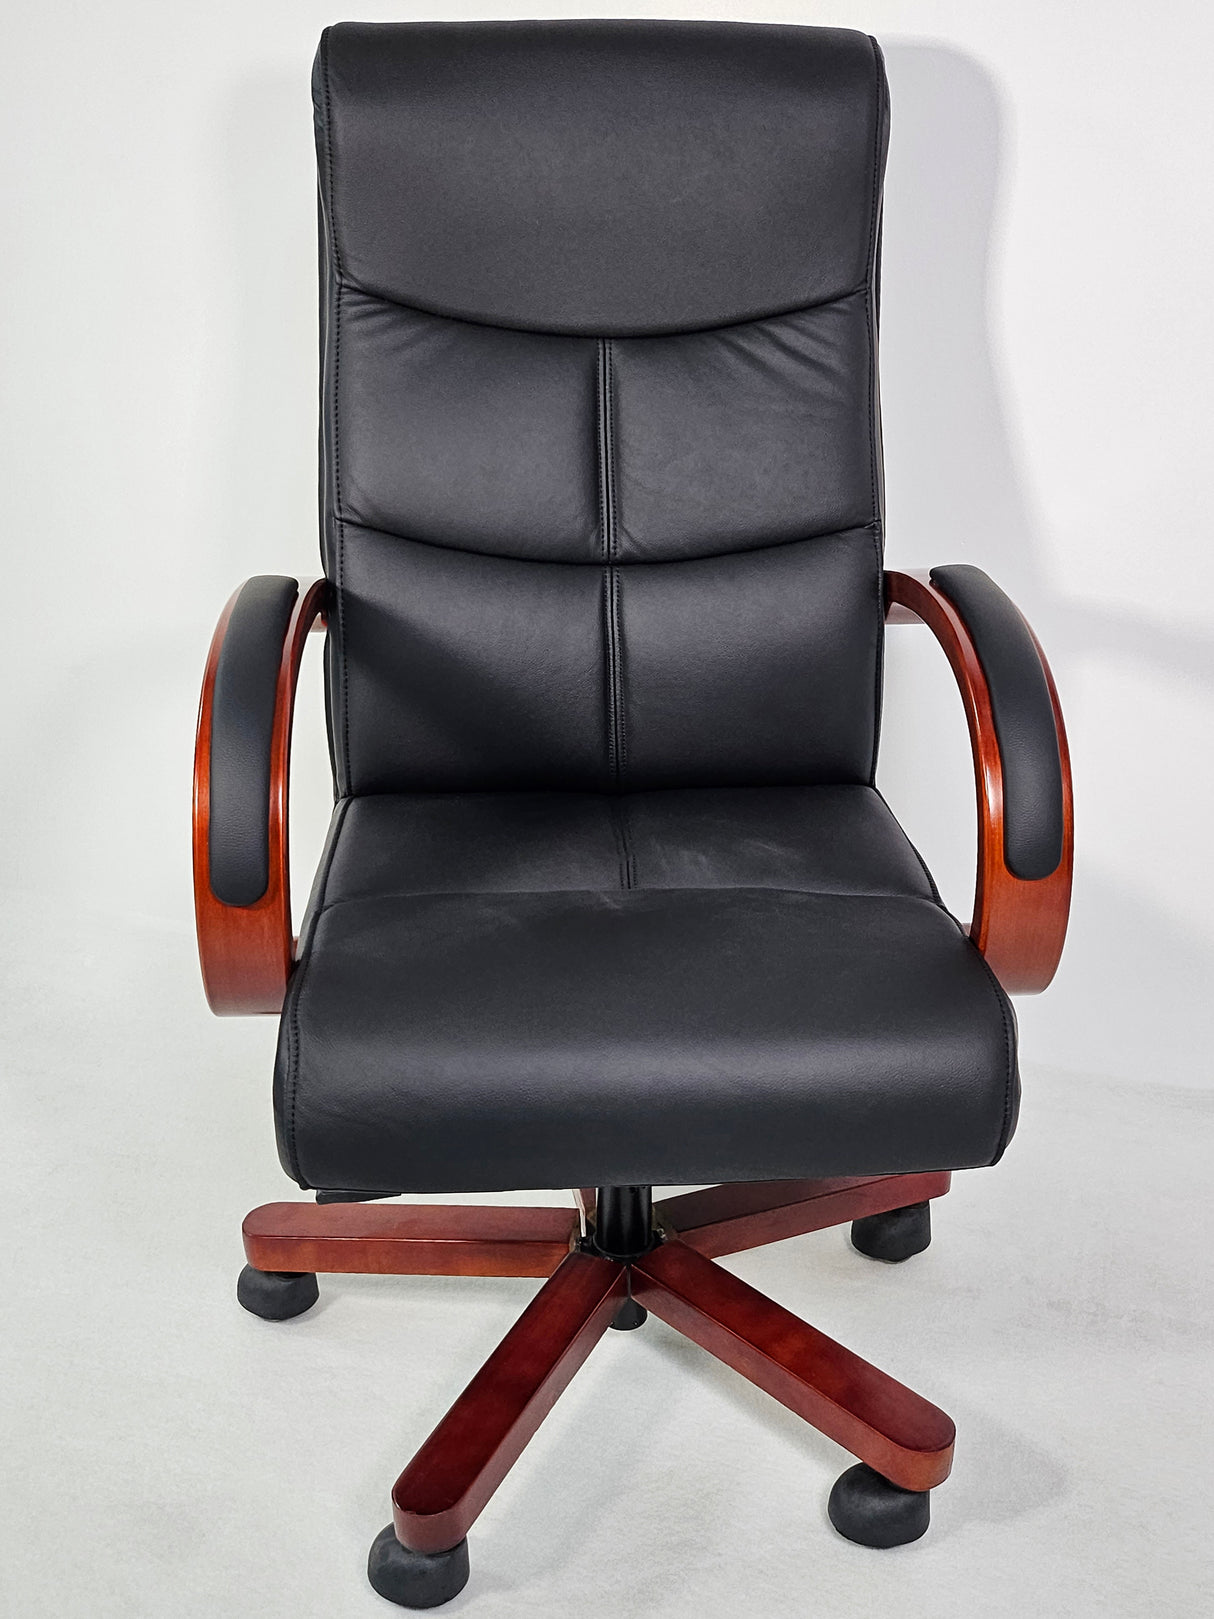 Genuine Black Leather Executive Office Chair with Curved Walnut Arms - H-073